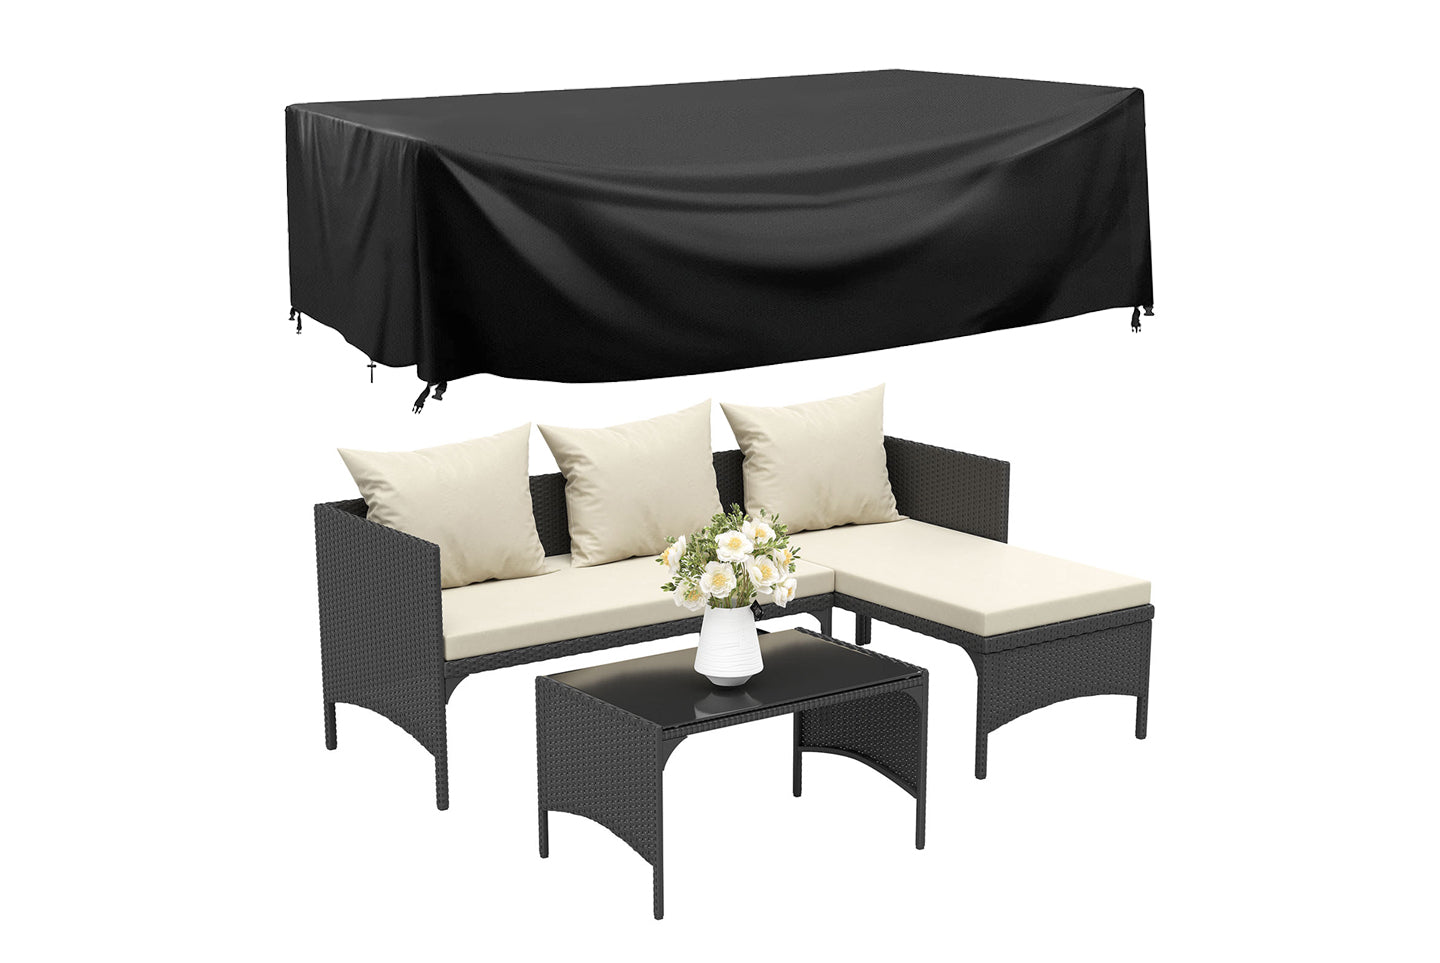 3Pcs Garden Lounge Sofa Set Rattan Furniture with Cushions Protective Cover Black